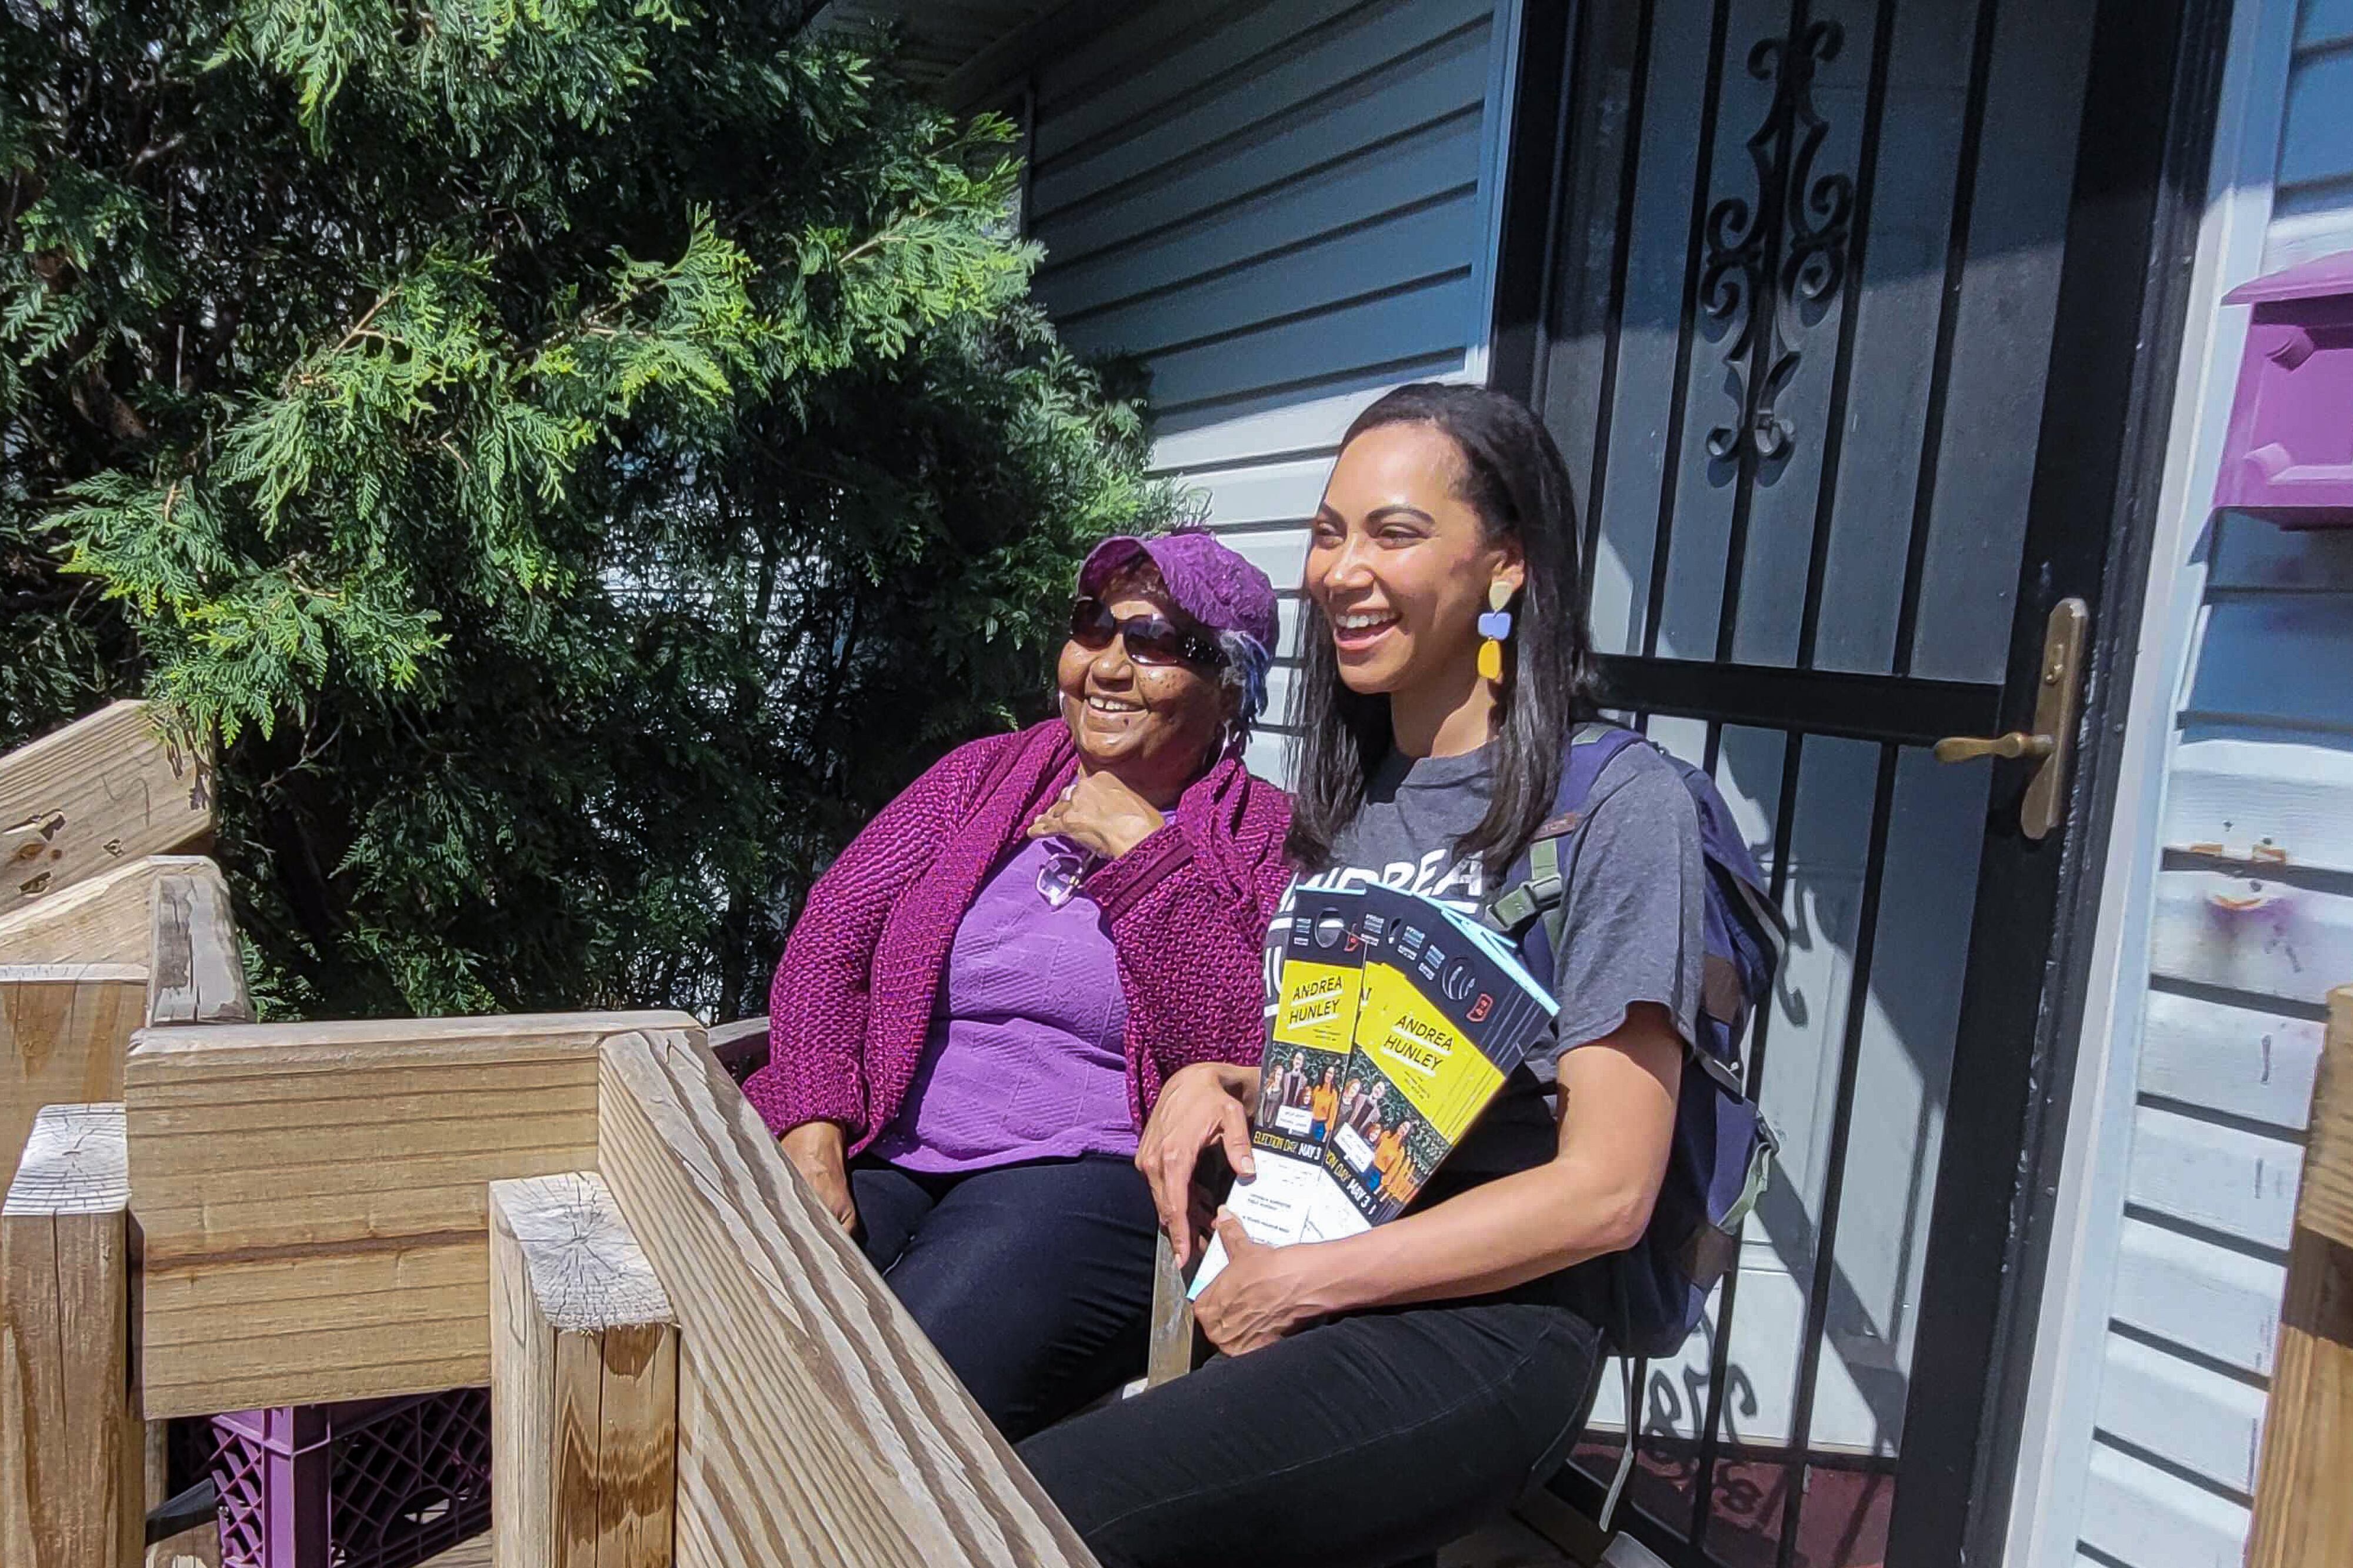 Two women, one in a purple sweater and purple shirt and hat, and black pants, the other wearing a gray campaign T-shirt and carrying fliers, sit smiling on the porch of a home.